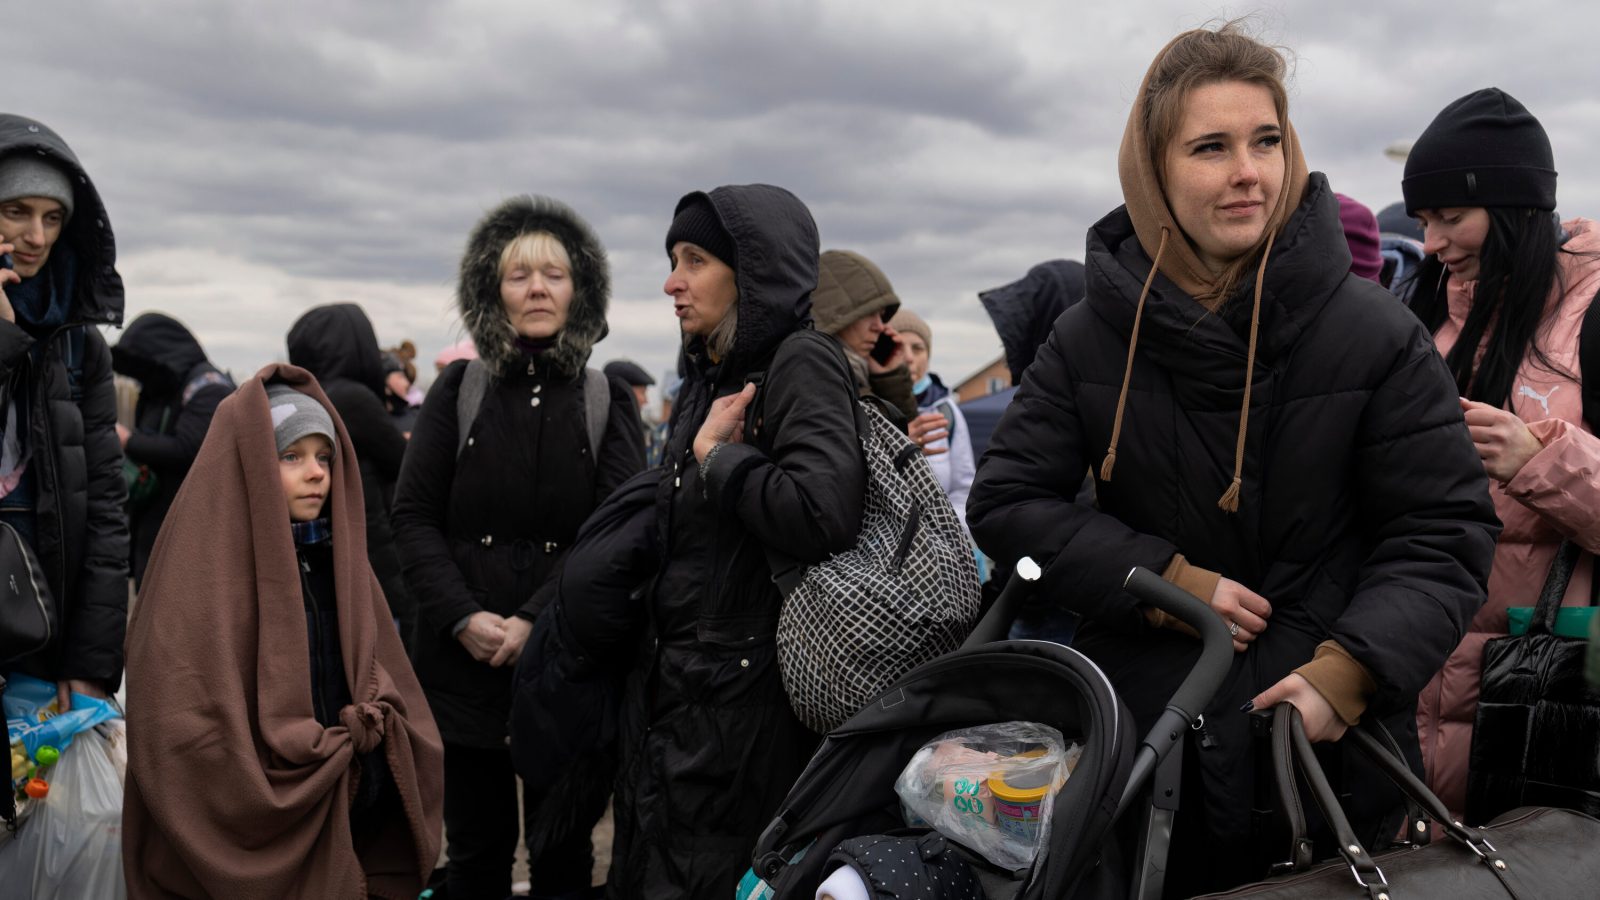 While Men Fight for Their Land in Ukraine, Their Families Try to Survive in a Foreign Country